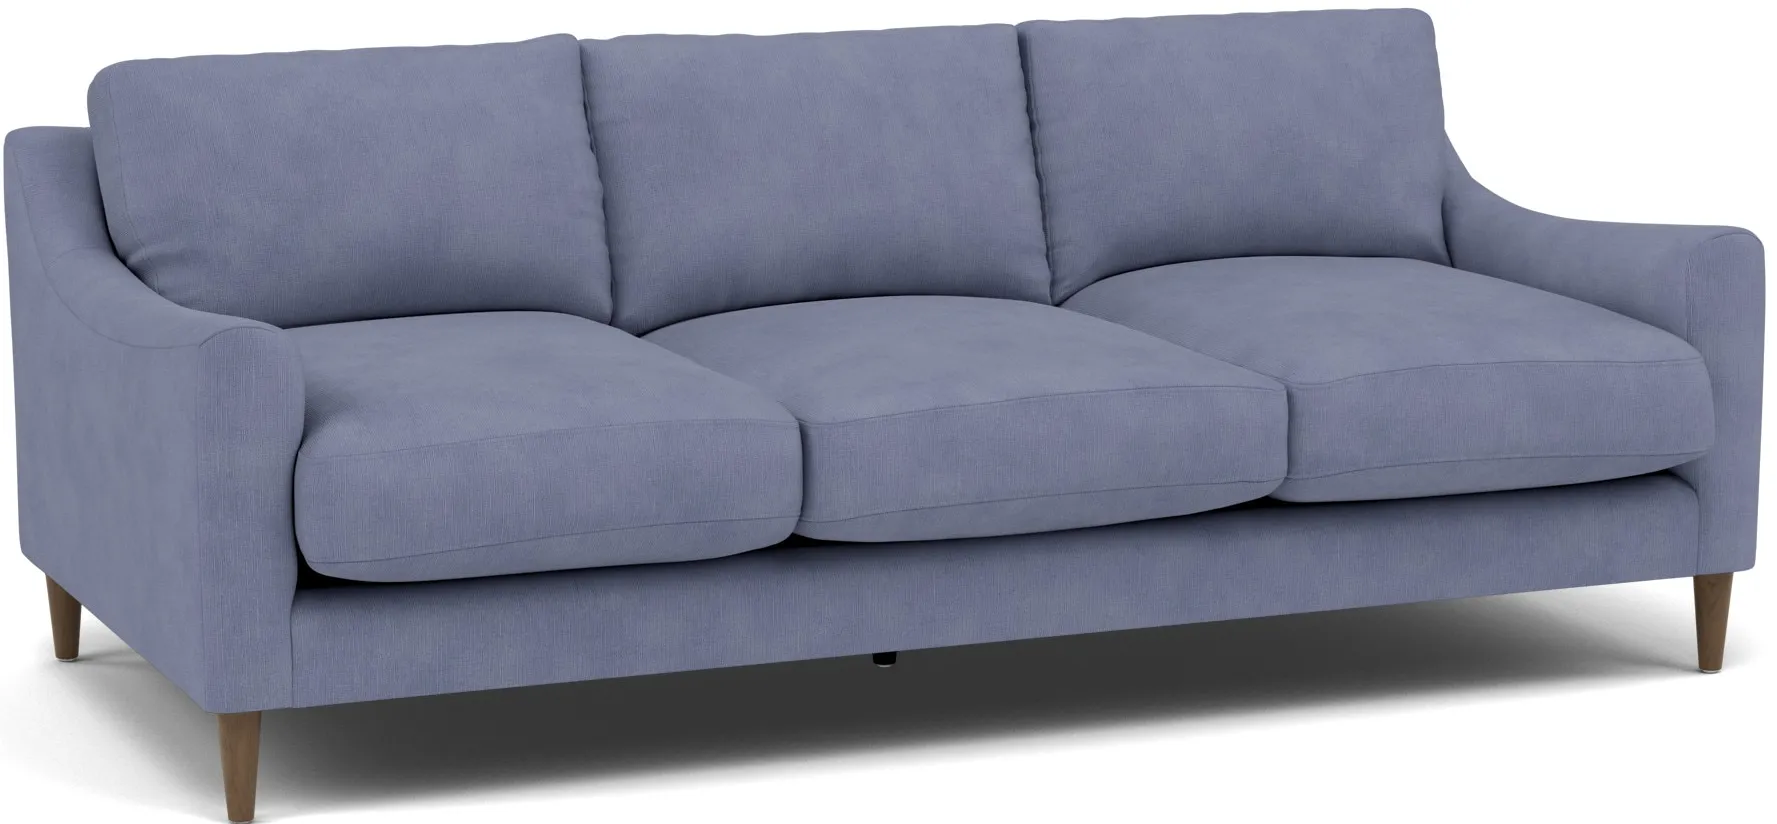 Mostny Sloped Track Arm Sofa Plus in Heavenly Naval